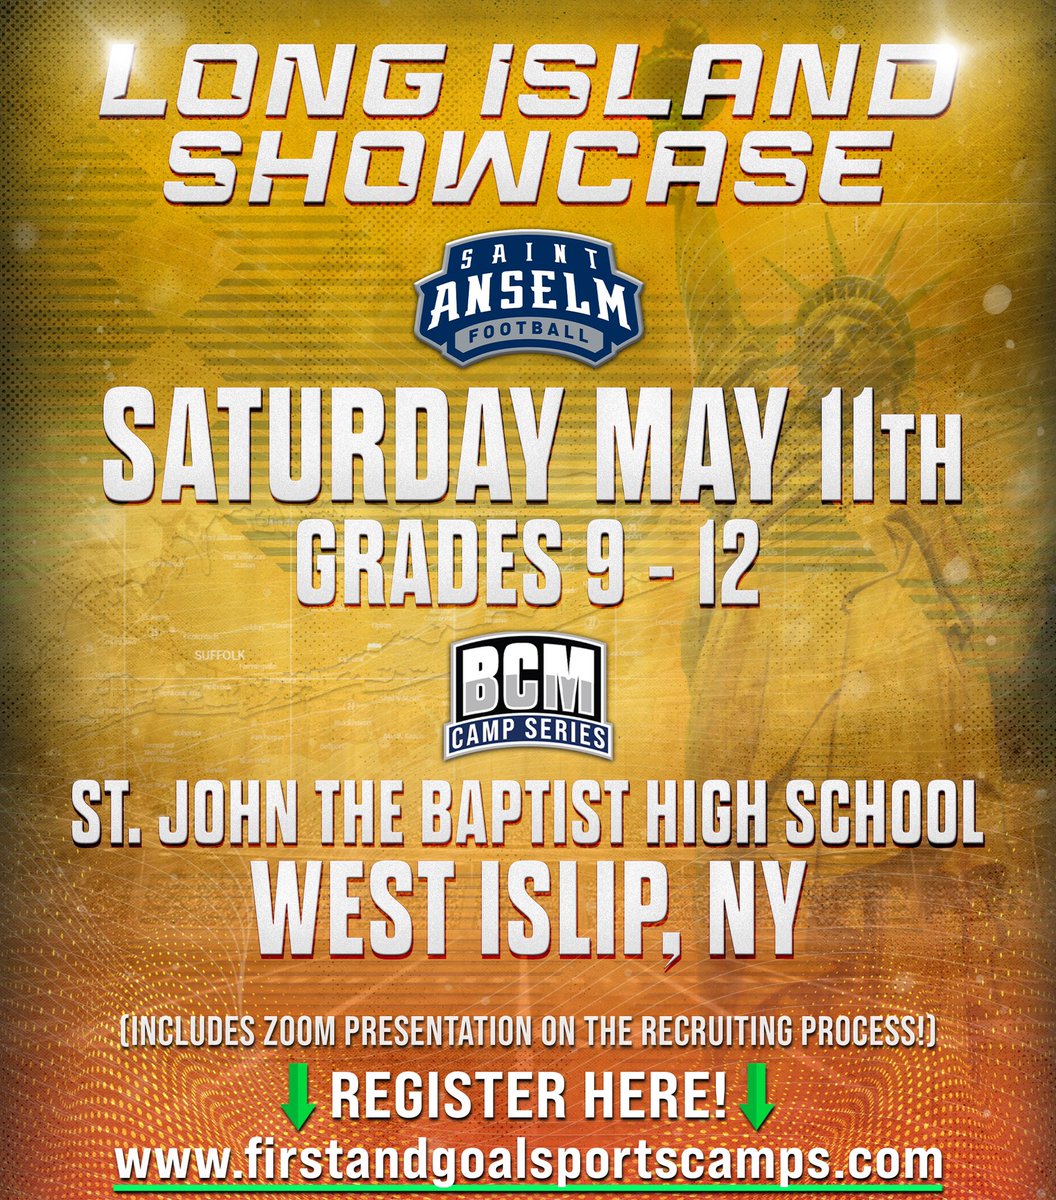 Hey Long Island! We have 20 spots left for our showcases on Saturday. There isn’t another time an @NCAADII scholarship school @STAHawks and the @NcaaDiv National champs @CortlandFB are at the same camp on the Island all season! Take advantage of it! firstandgoalsportscamps.com